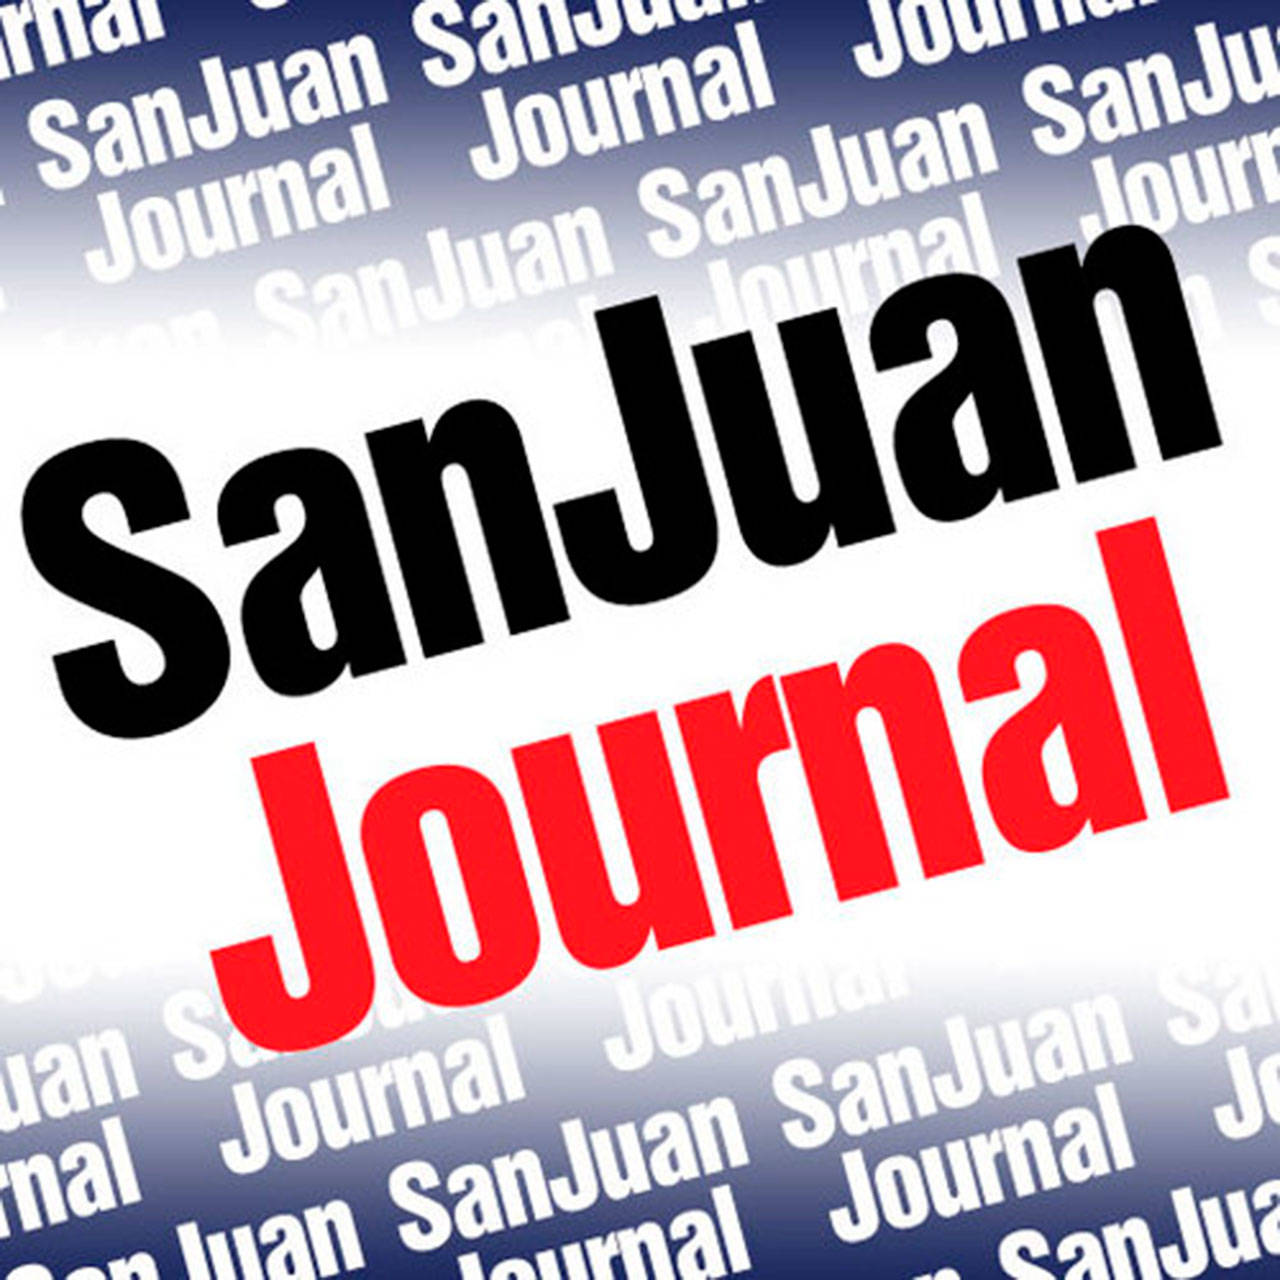 New year brings special sections to Journal of the San Juans | Editorial